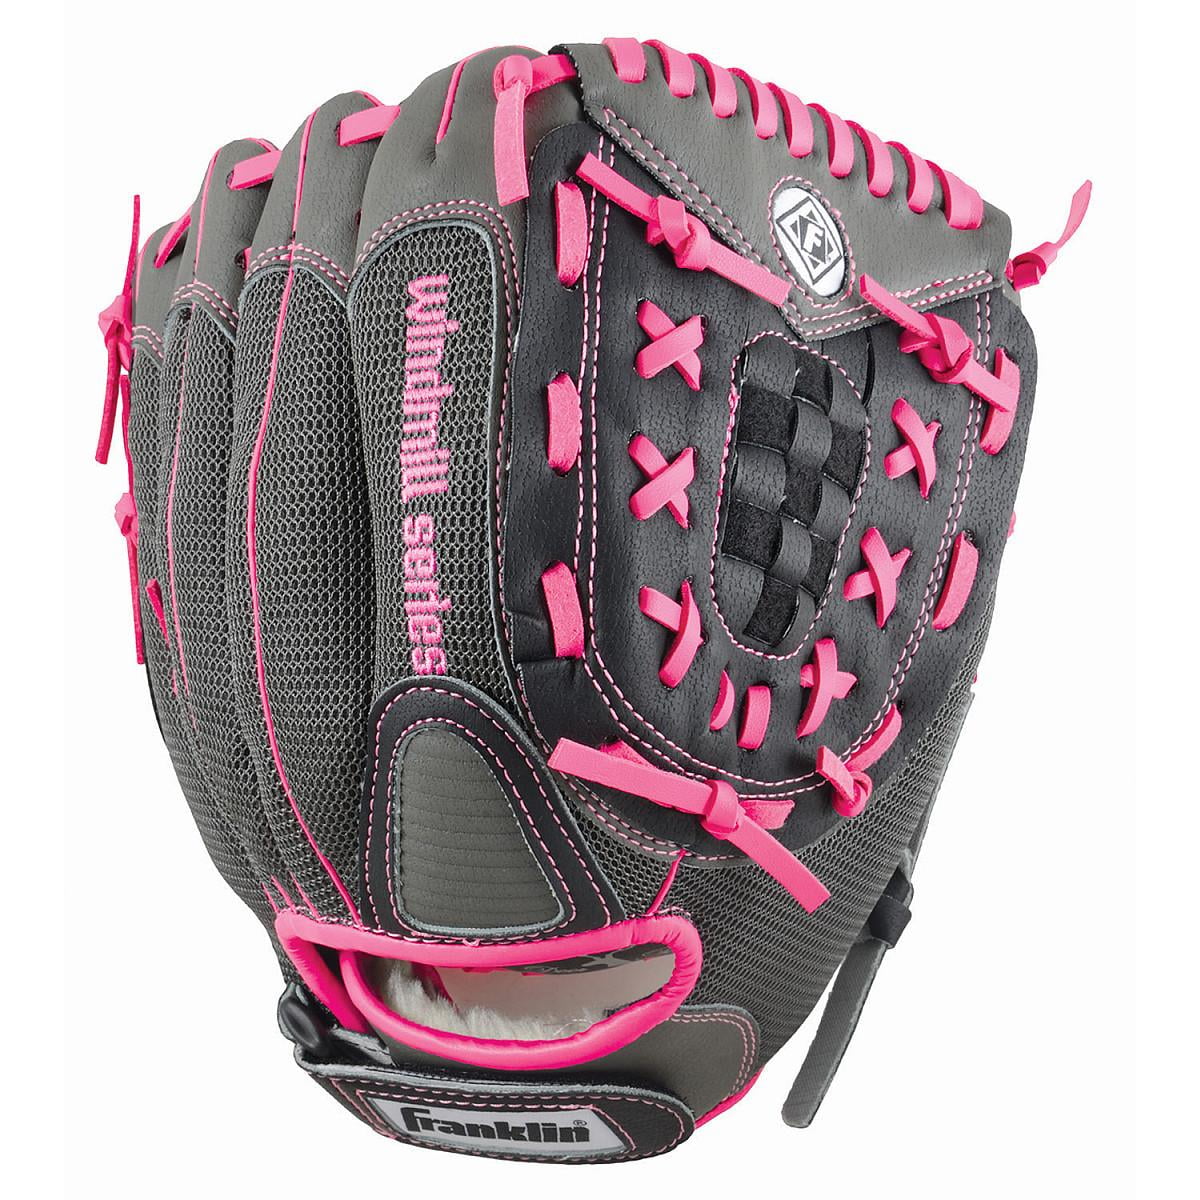 Franklin Sports Fastpitch Pro Series Softball Gloves for sale online 